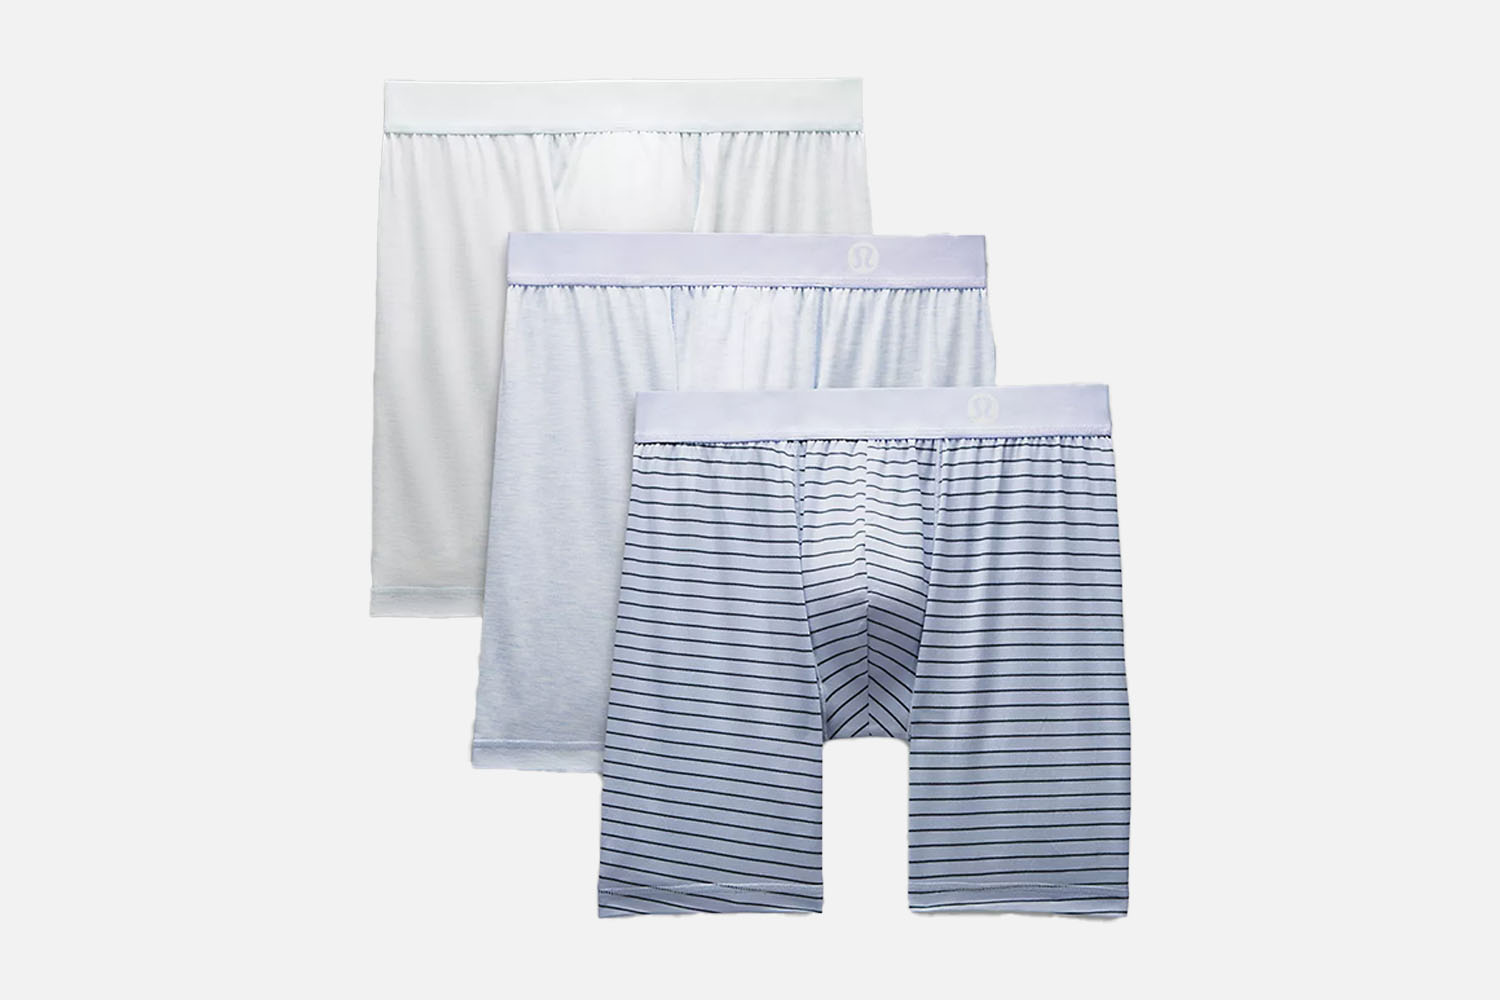 The Best Boxers Known to Man: lululemon Always In Motion 7″ Boxer (3-Pack)